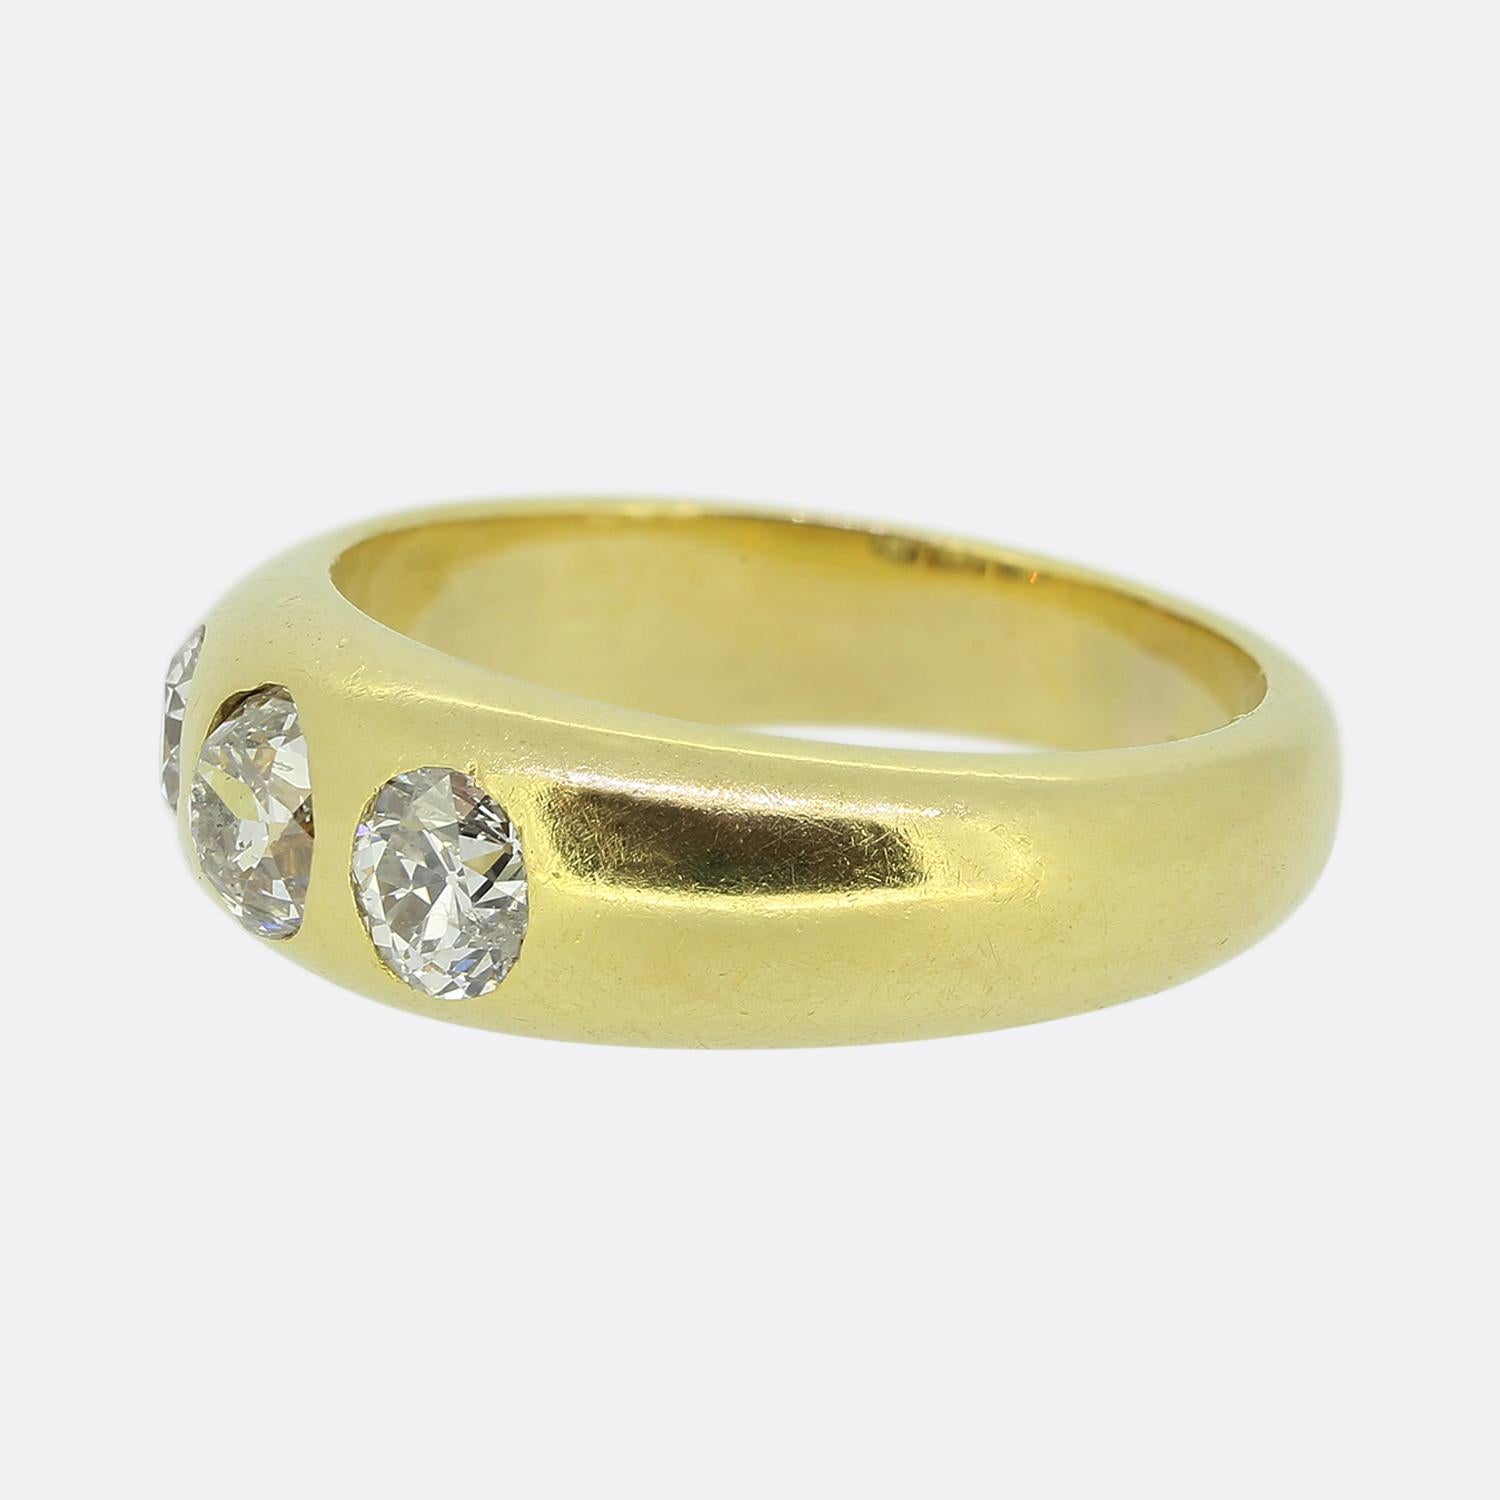 Here we have a classically styled three-stone diamond ring. This antique piece has been crafted from a warm 18ct yellow gold and features three round faceted old cut diamonds; the largest of which sits at the centre. All three of these chunky stones